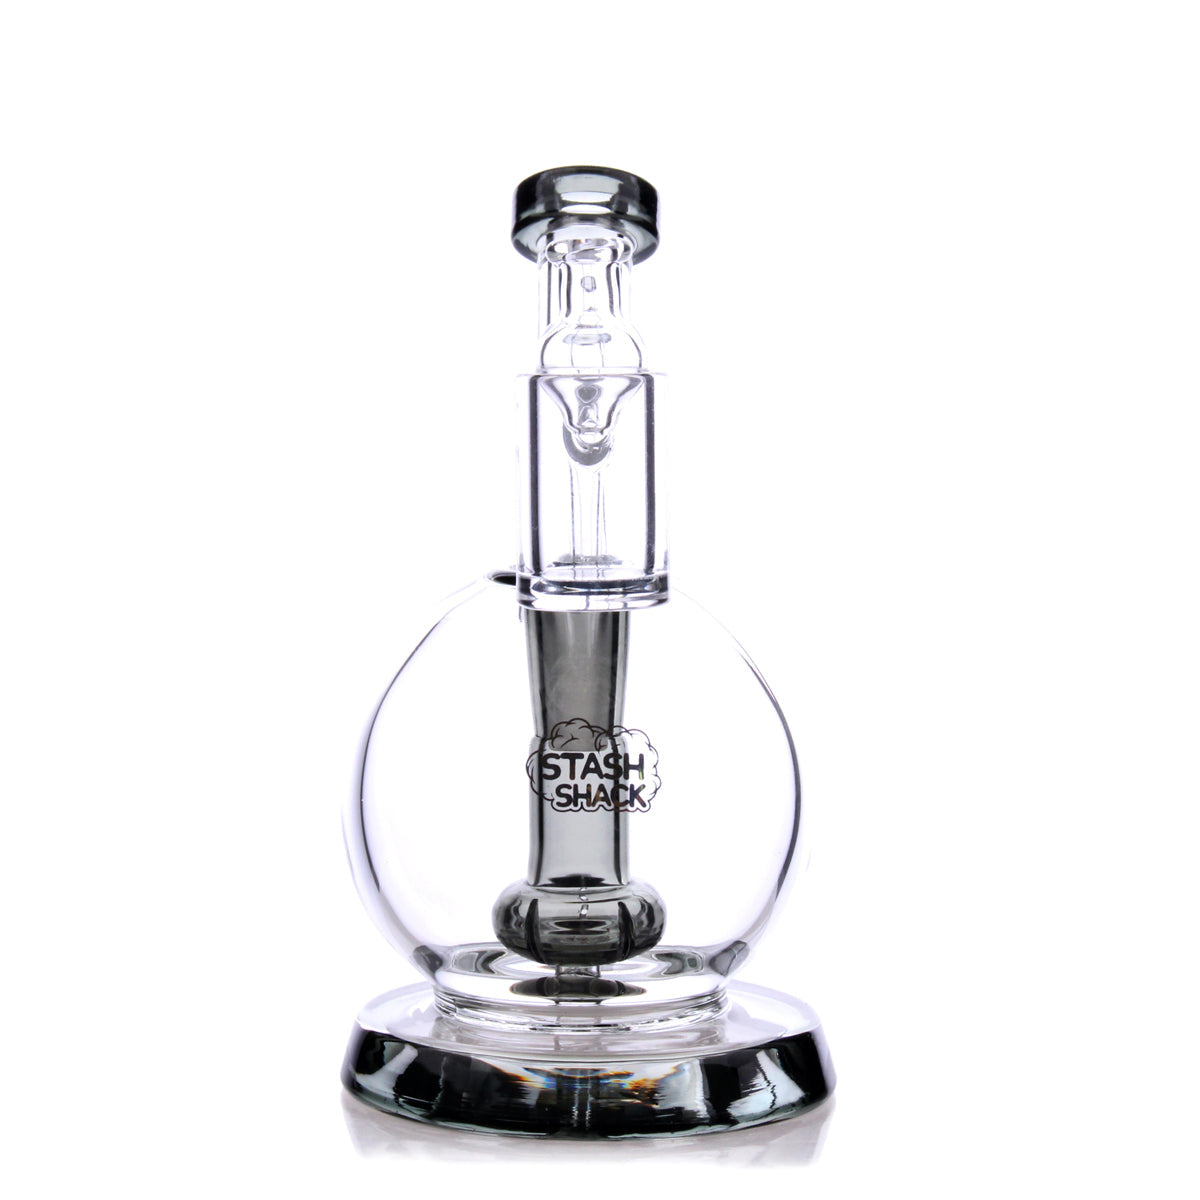 The Stash Shack TerpGlobe Mini Rig in Black, Front View with Showerhead Percolator